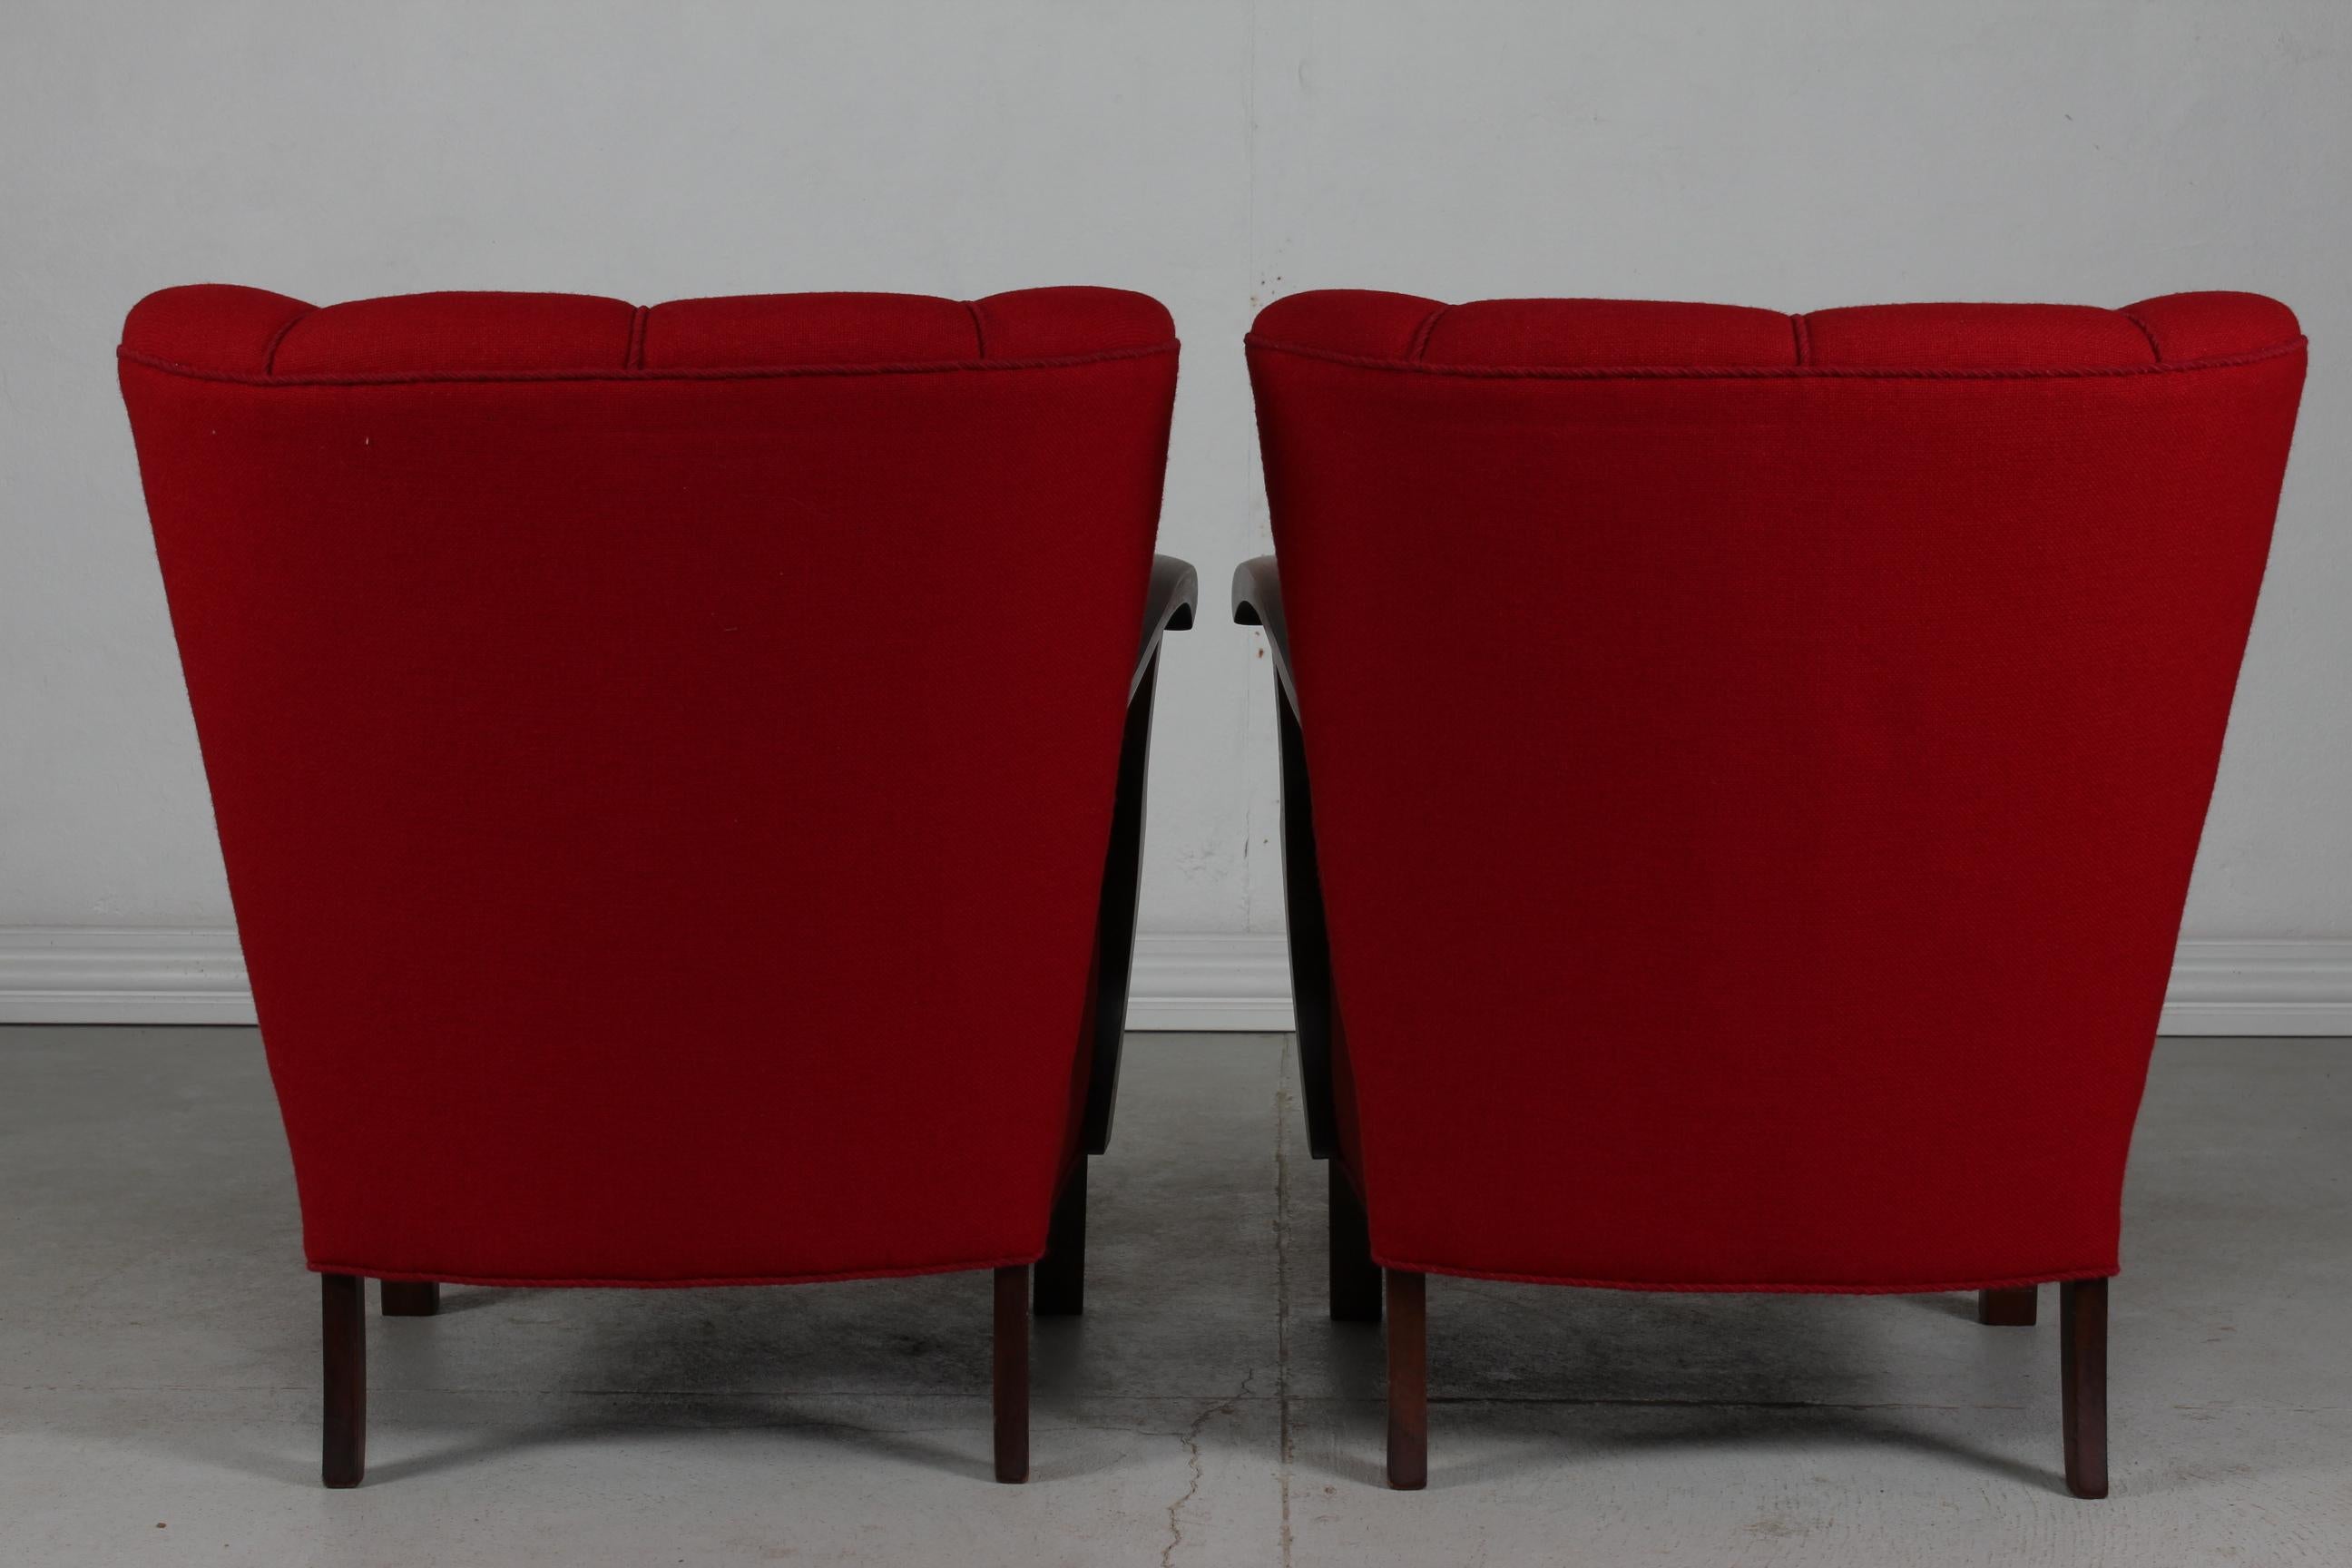 Pair of Art Deco Easy Chairs in Viggo Boesen Style with Red Wool, Denmark 1930's For Sale 5